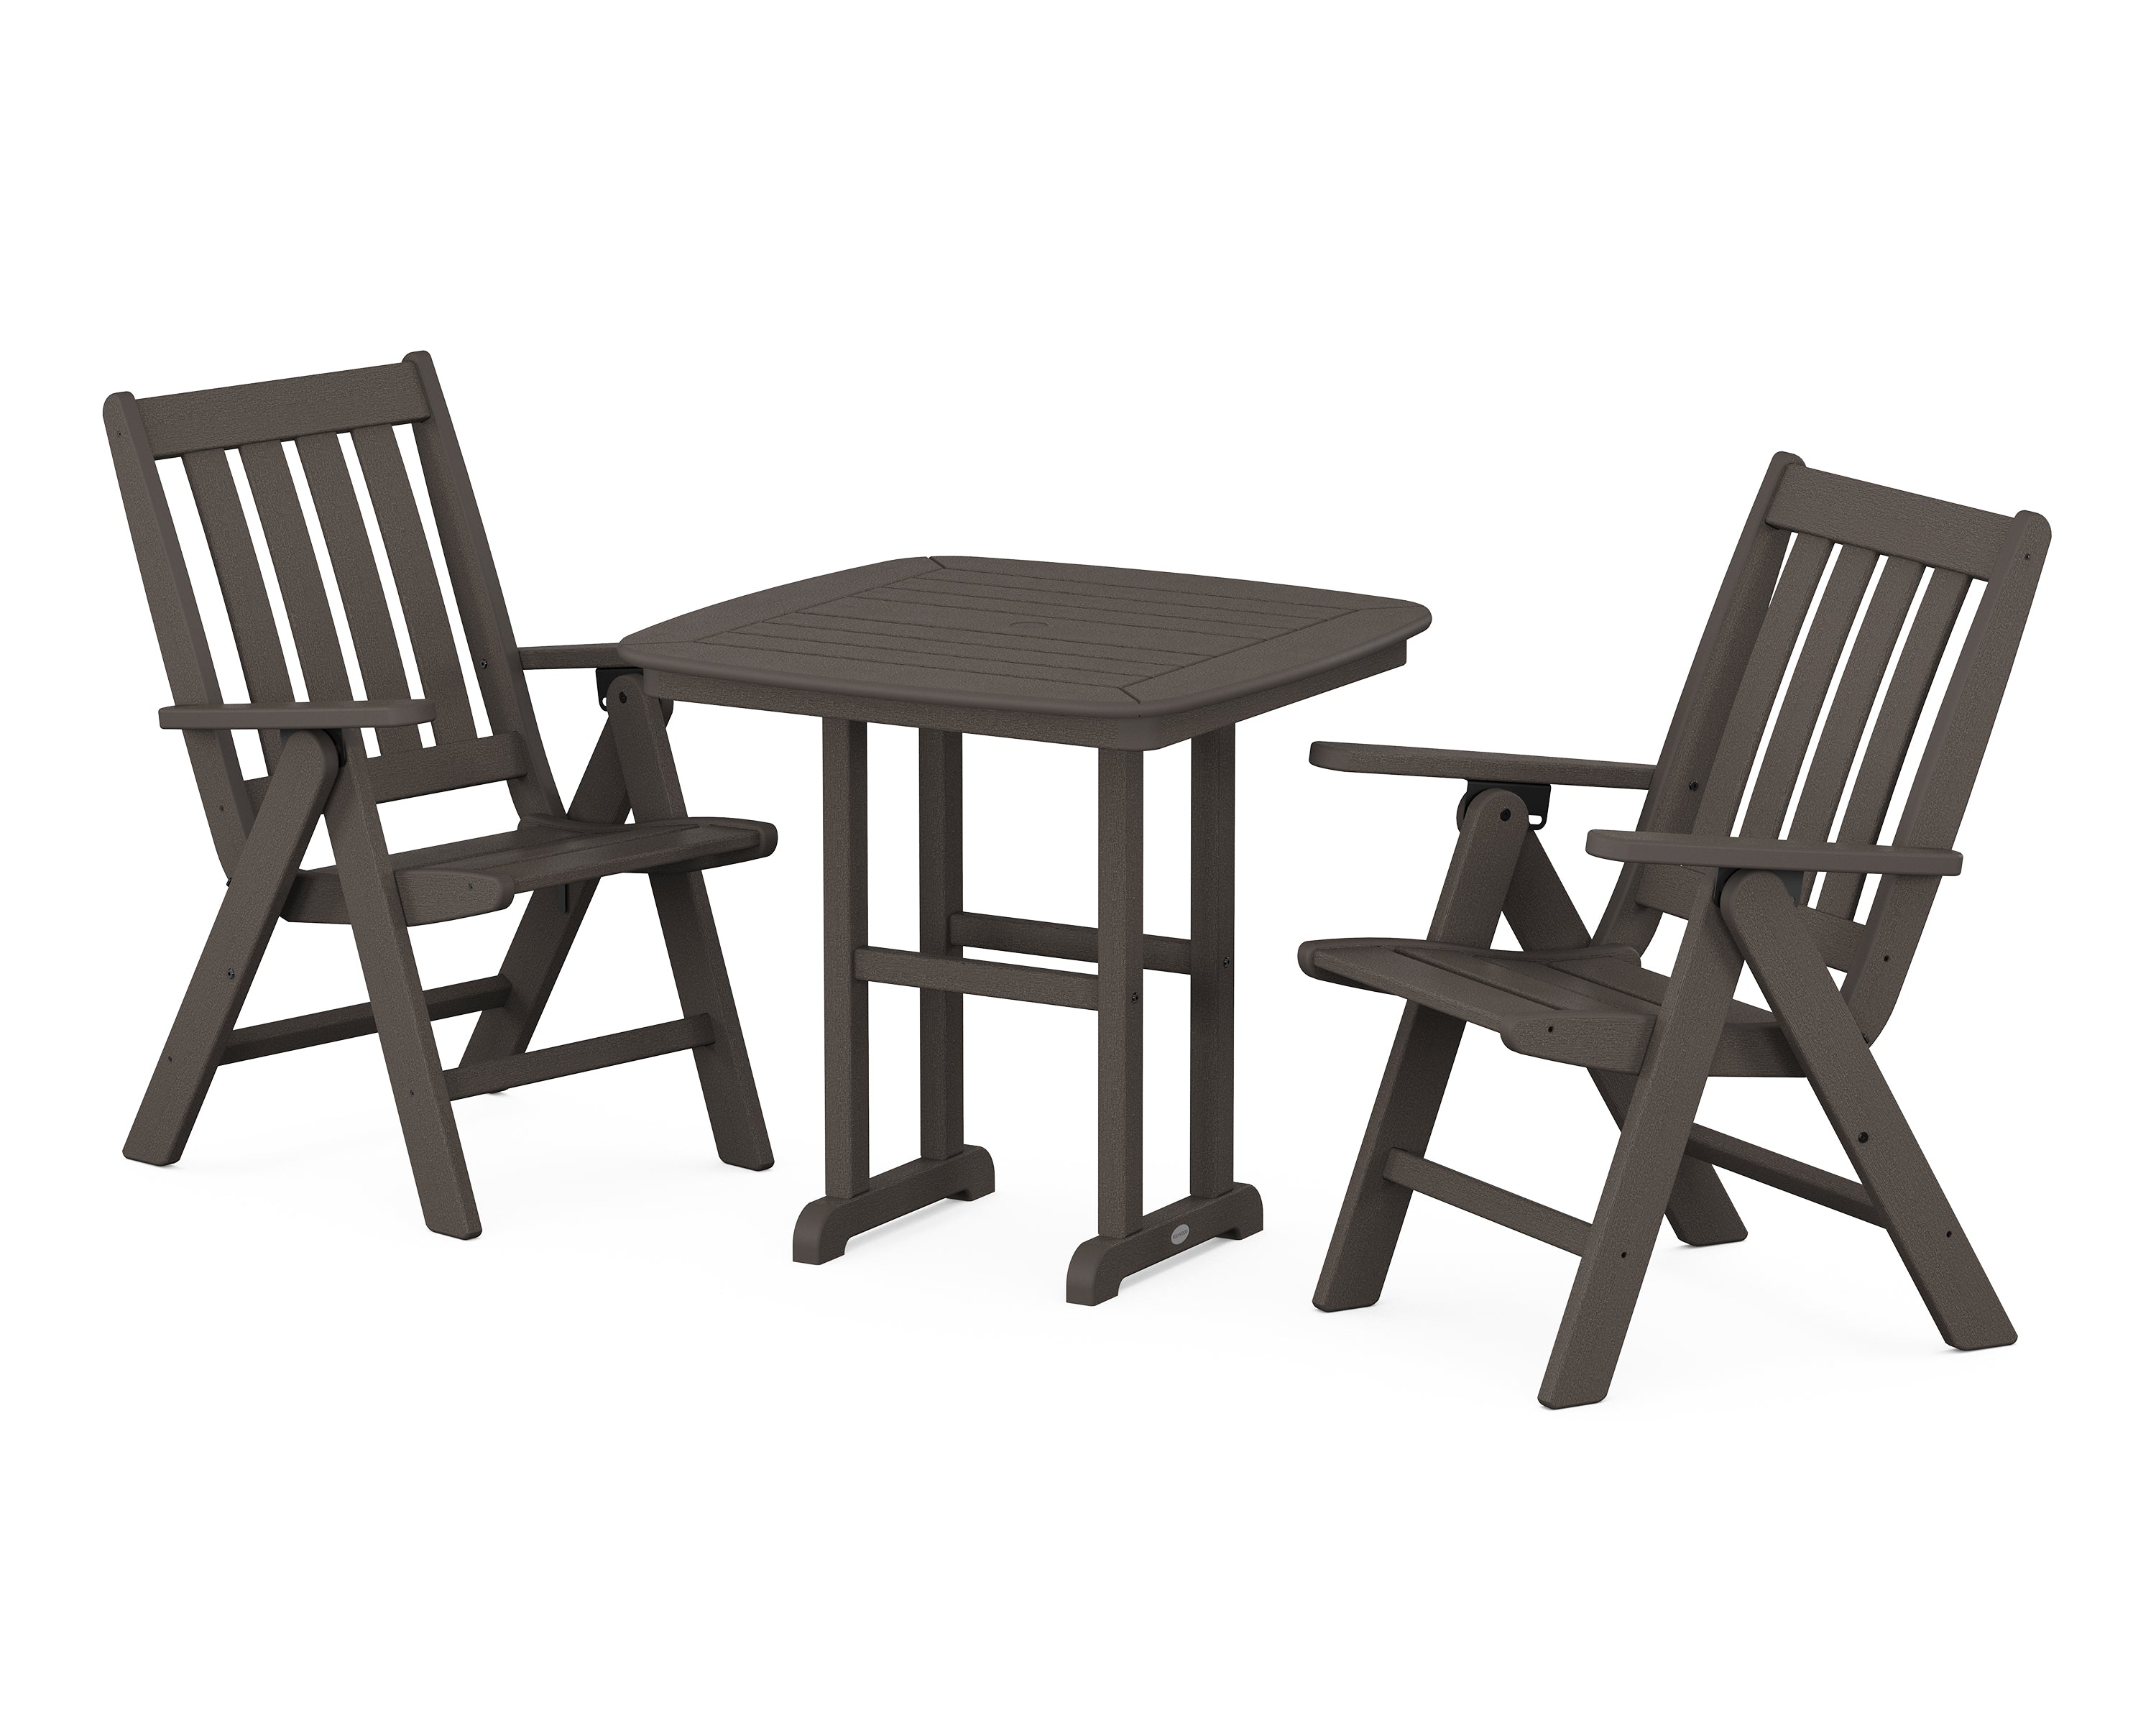 POLYWOOD® Vineyard Folding Chair 3-Piece Dining Set in Vintage Coffee